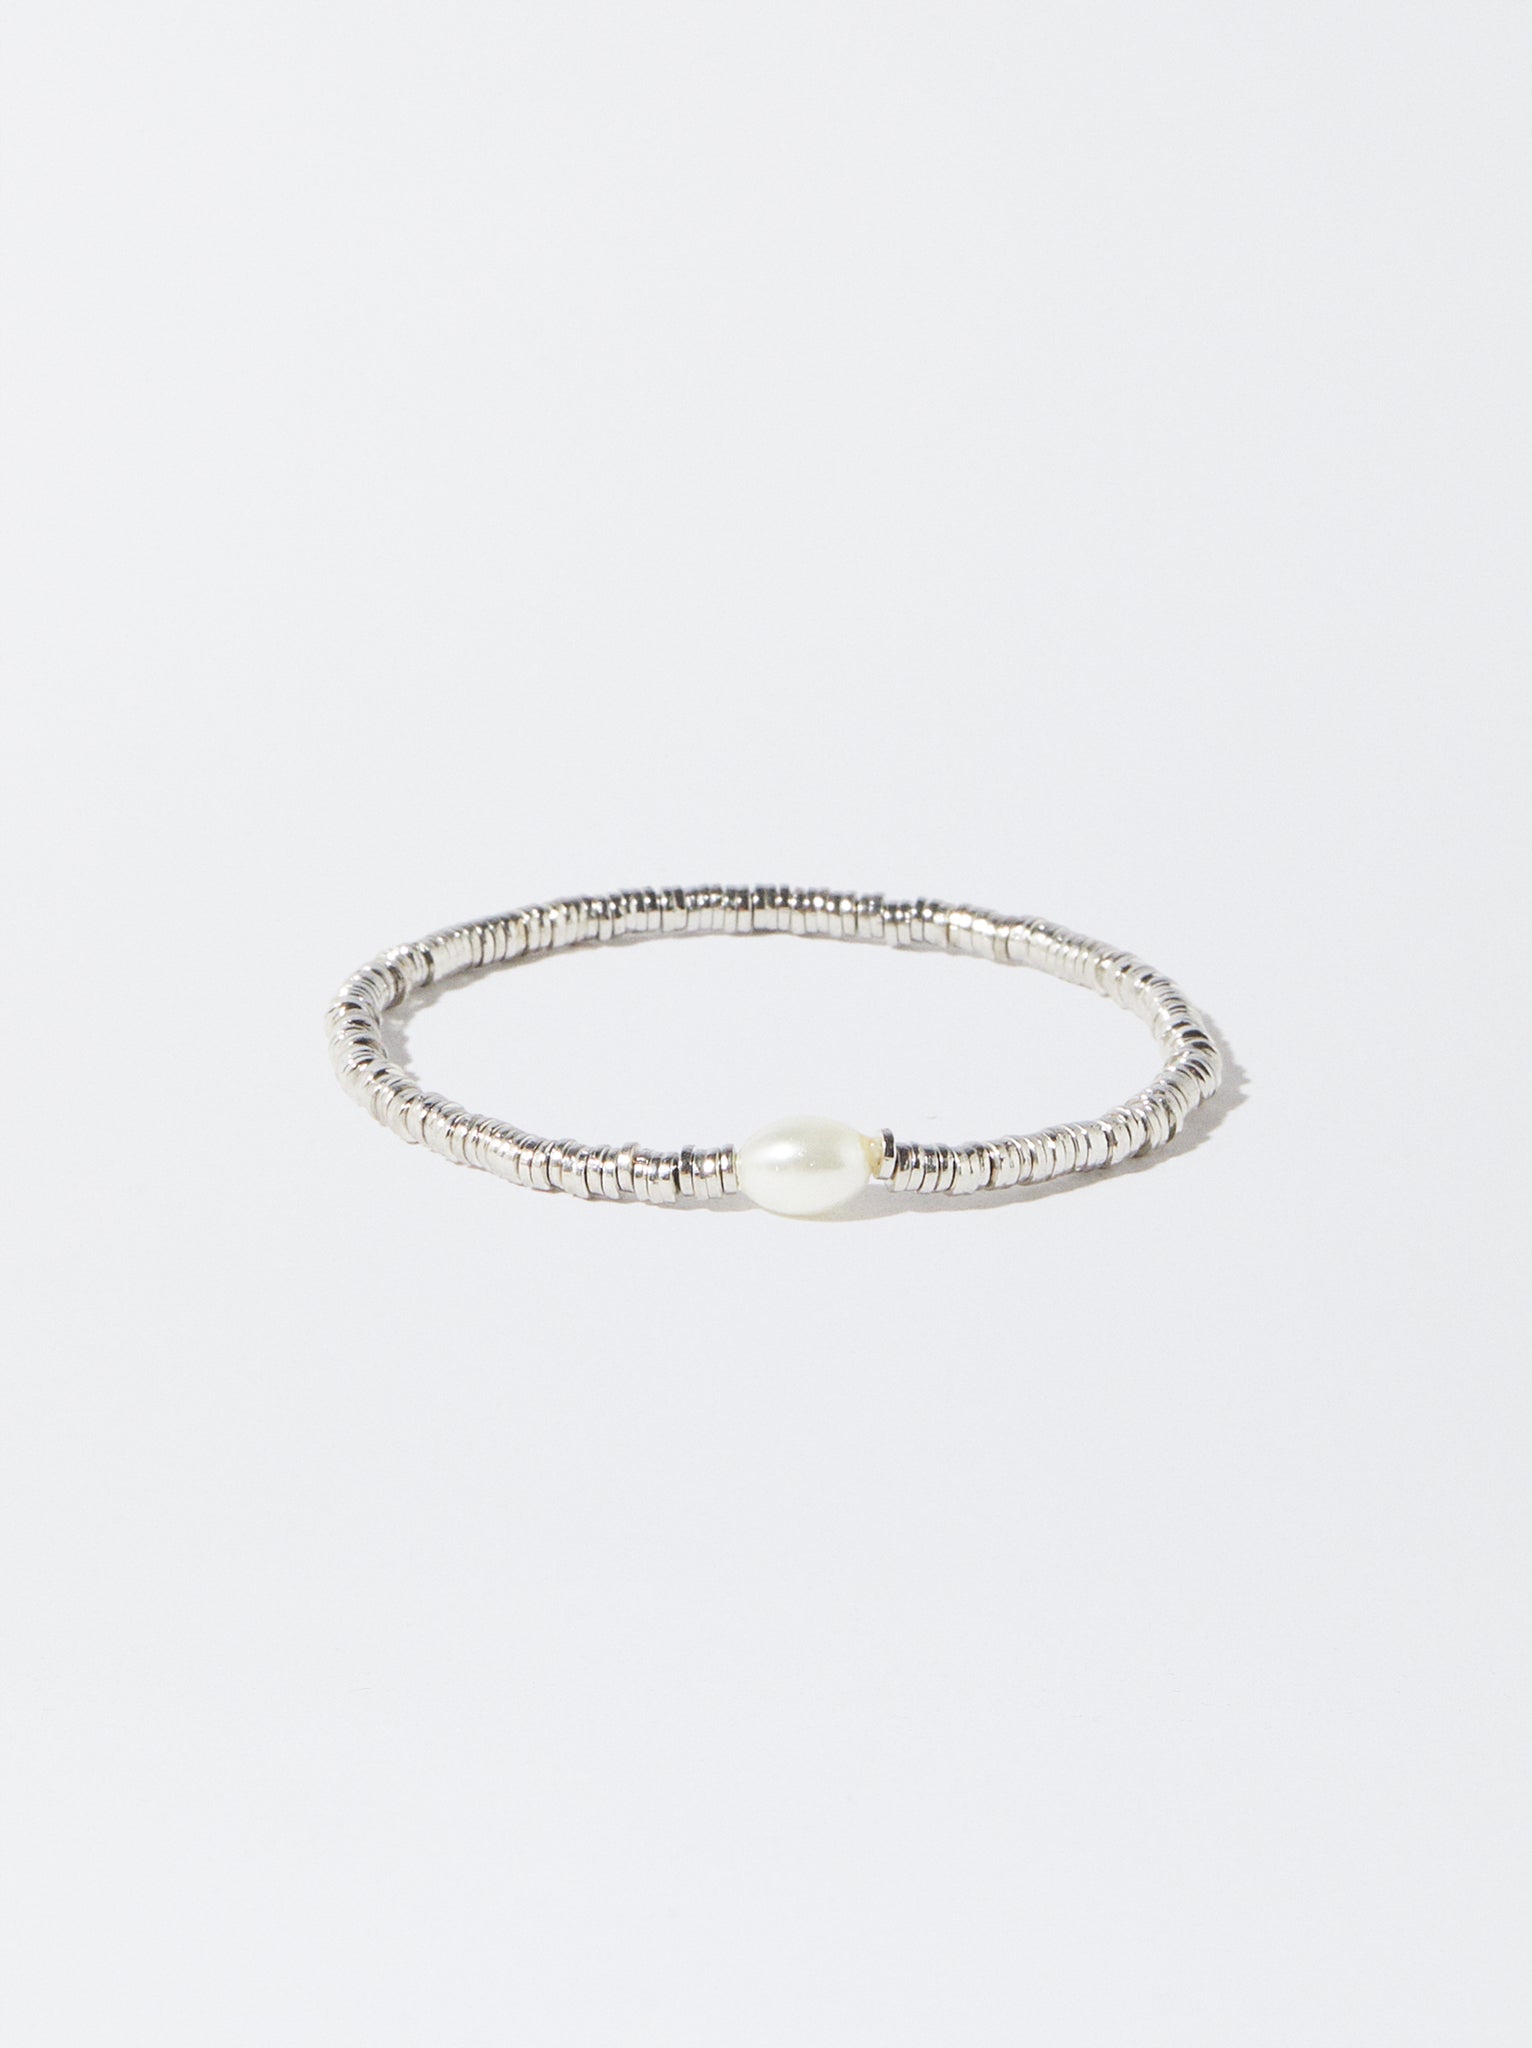 Silver-Plated Bracelet With Faux Pearl